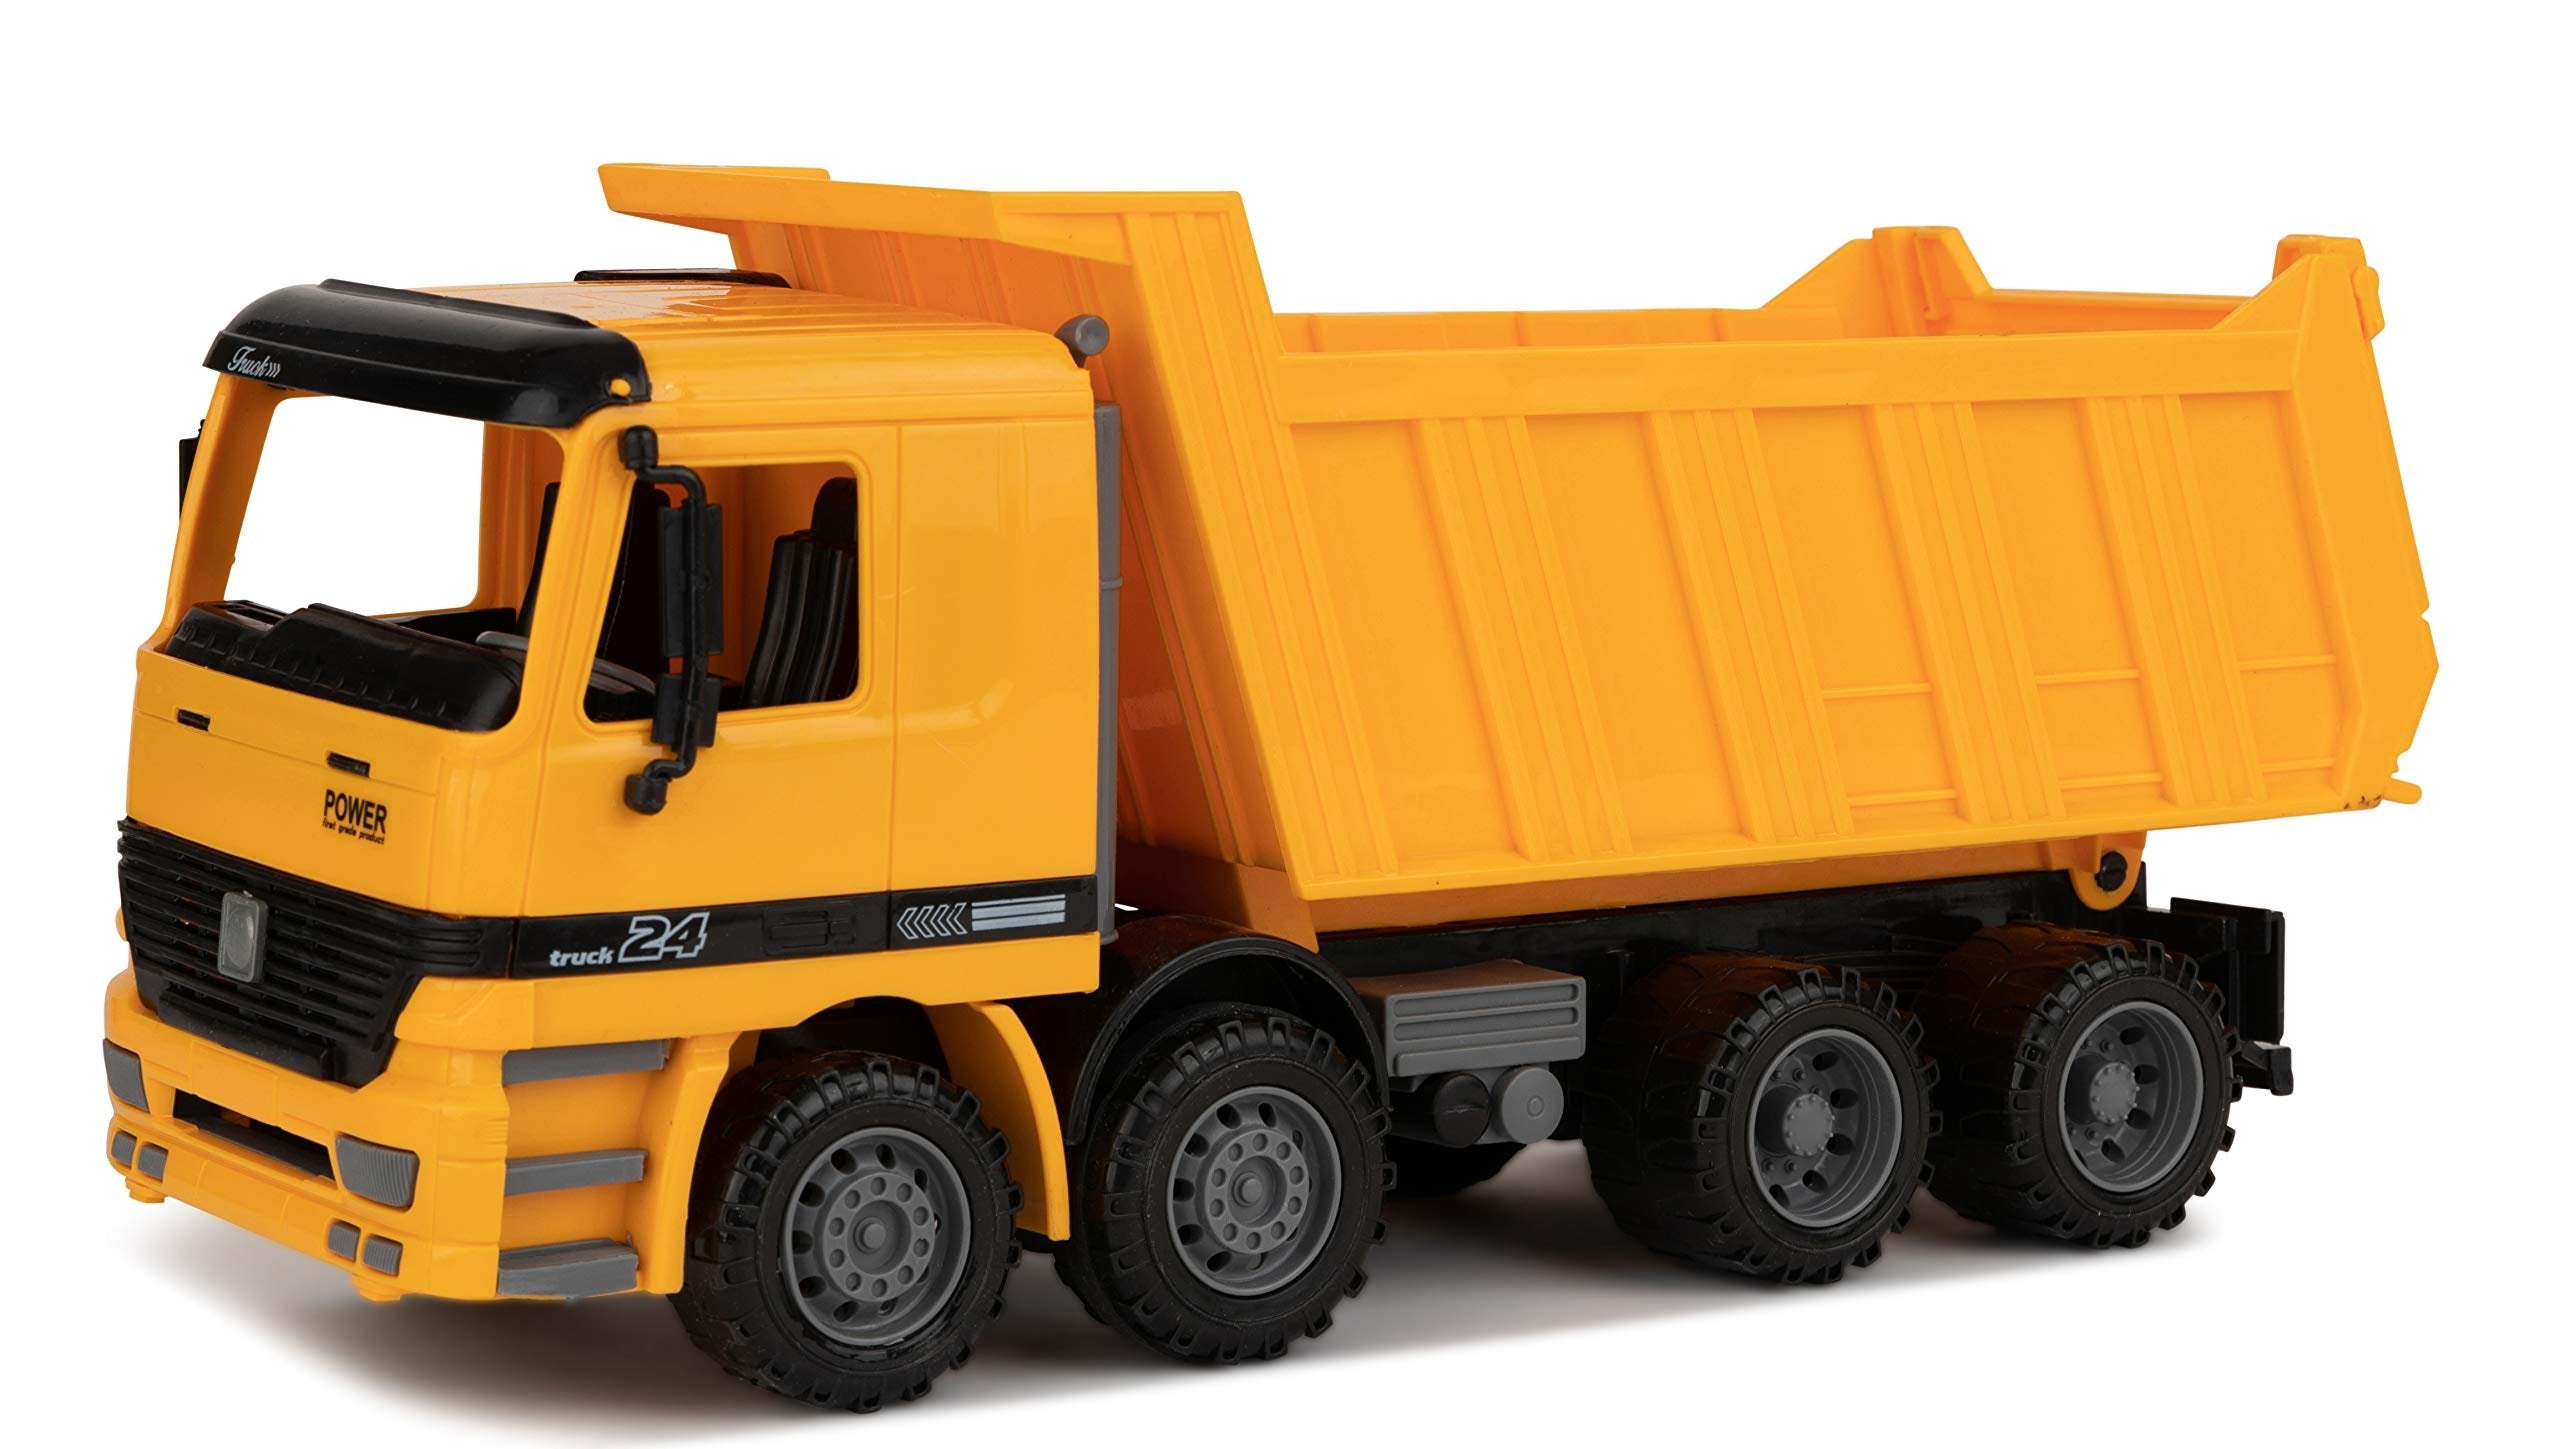 Excavator & Dump Truck Toy for Kids (Set of 2) - Moveable Claw & Lifting Back - Garbage Truck & Bulldozer Digger - Construction Vehicle for Kids & Children by Toy To Enjoy